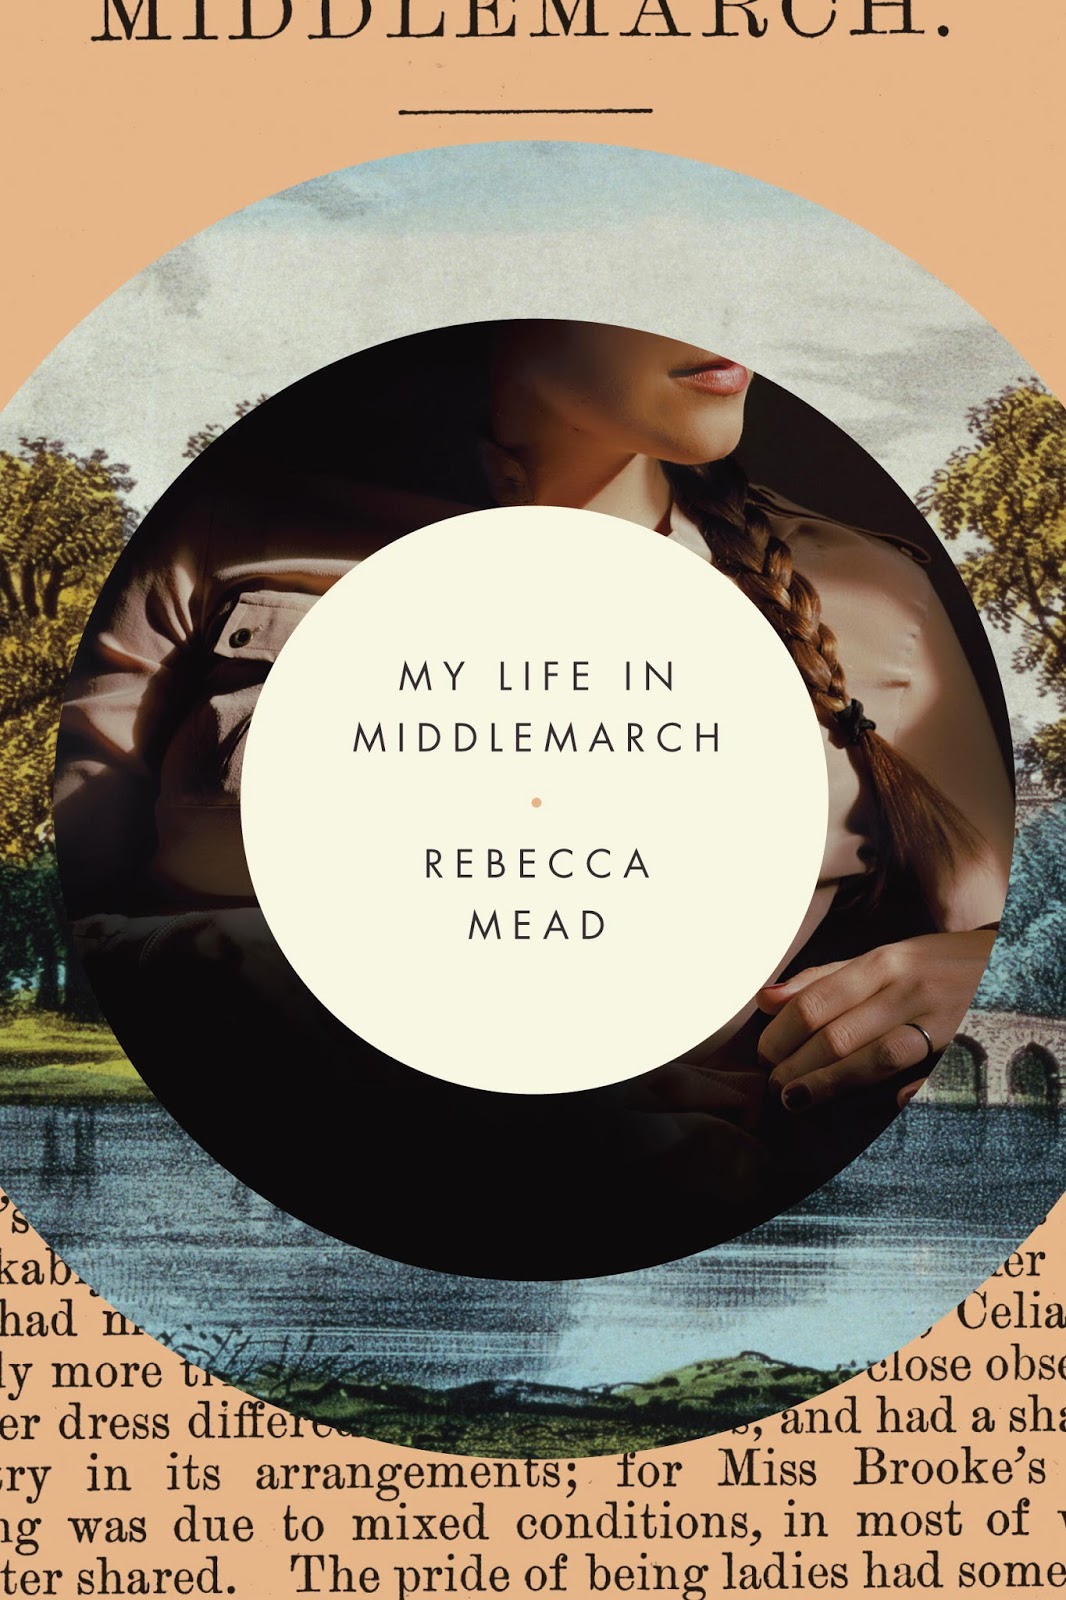 http://discover.halifaxpubliclibraries.ca/?q=title:my%20life%20in%20middlemarch